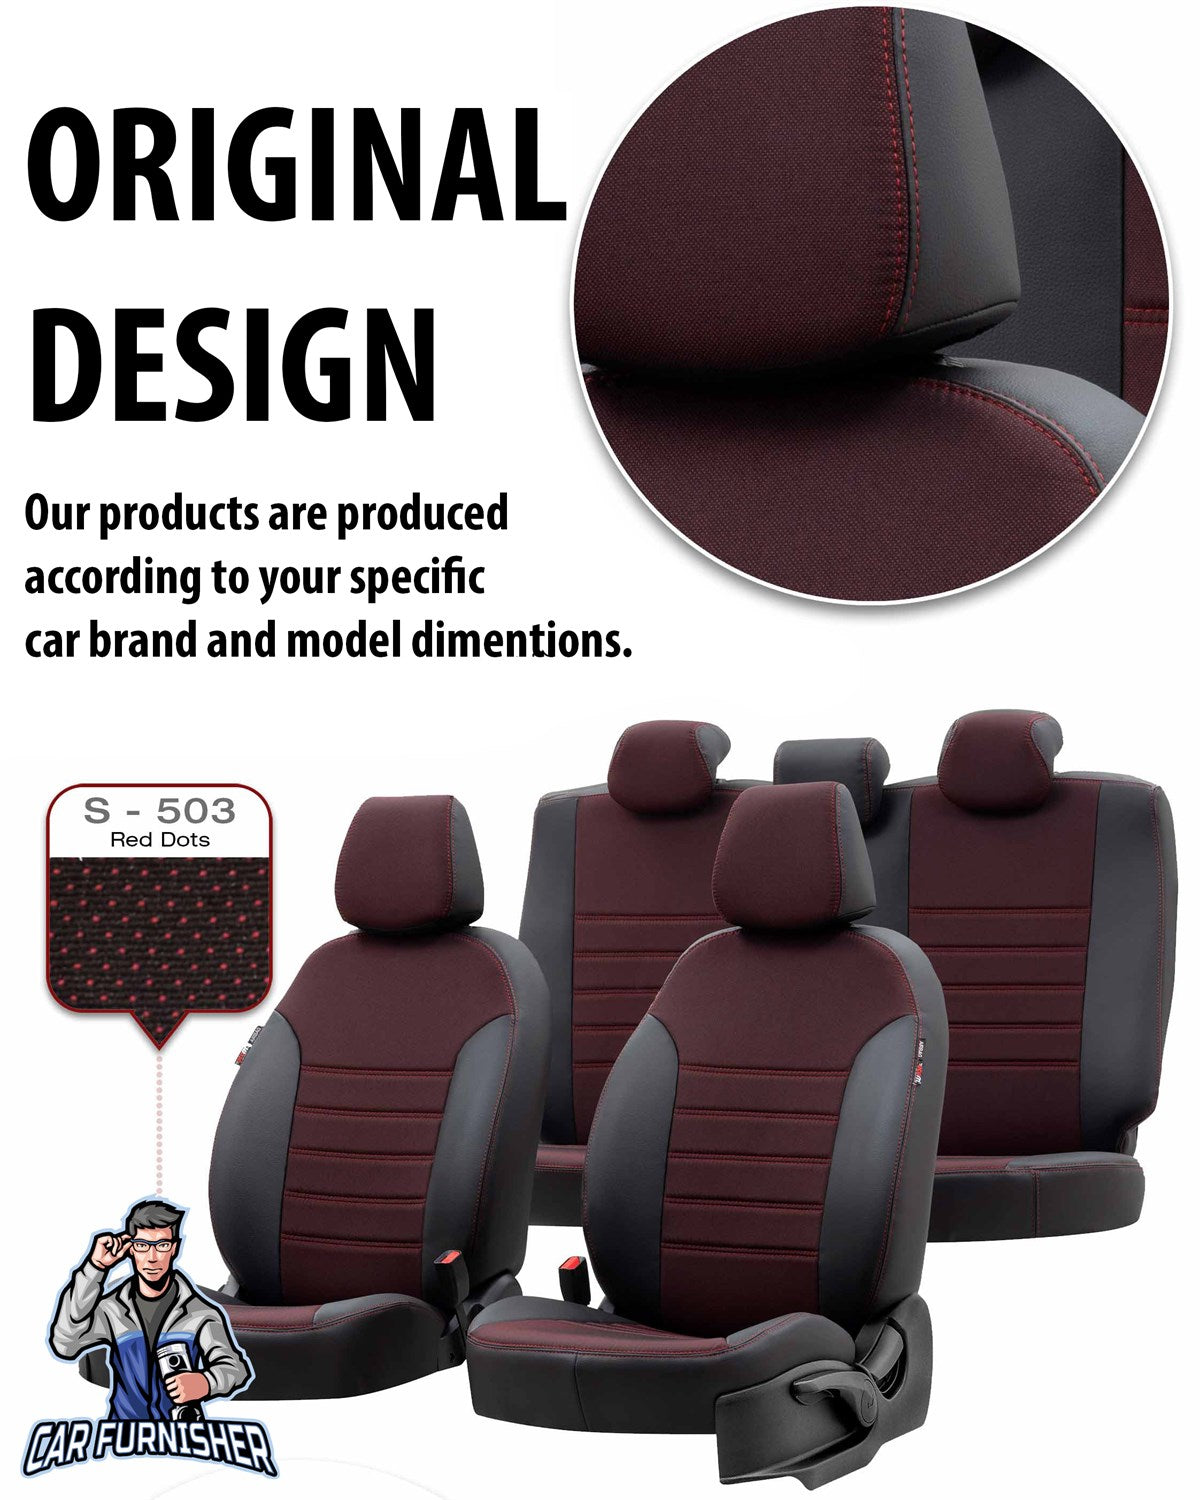 Ssangyong Actyon Seat Covers Paris Leather & Jacquard Design Dark Beige Leather & Jacquard Fabric